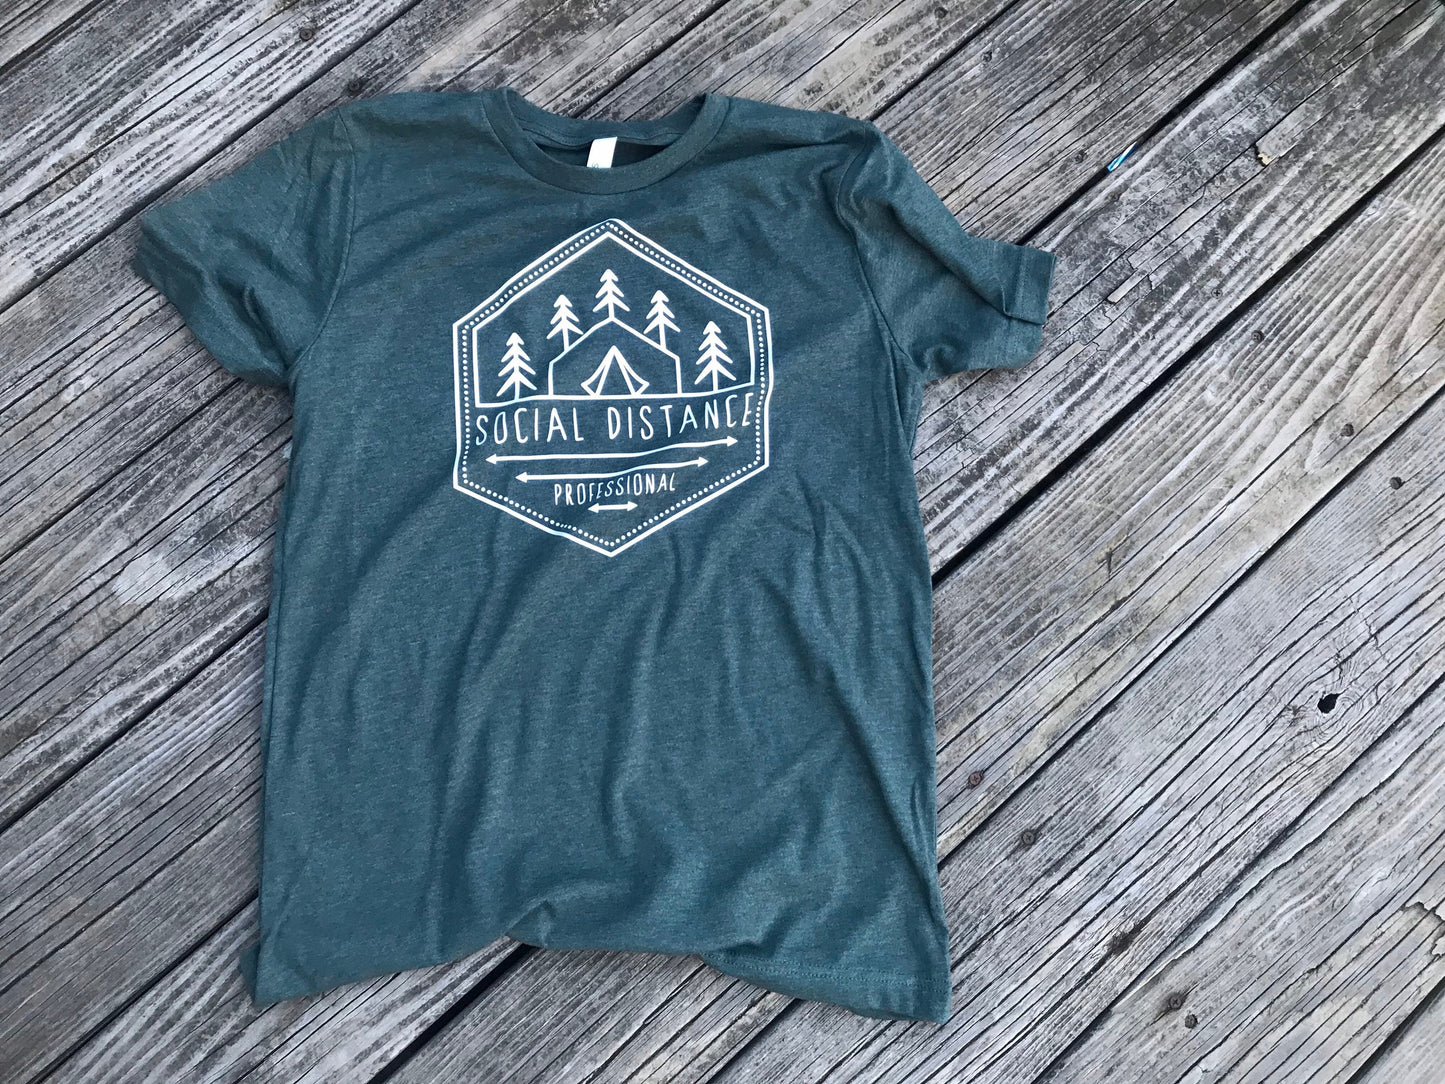 Retro Camp or Hiking/Mountain Shirt - Social Distance Professional